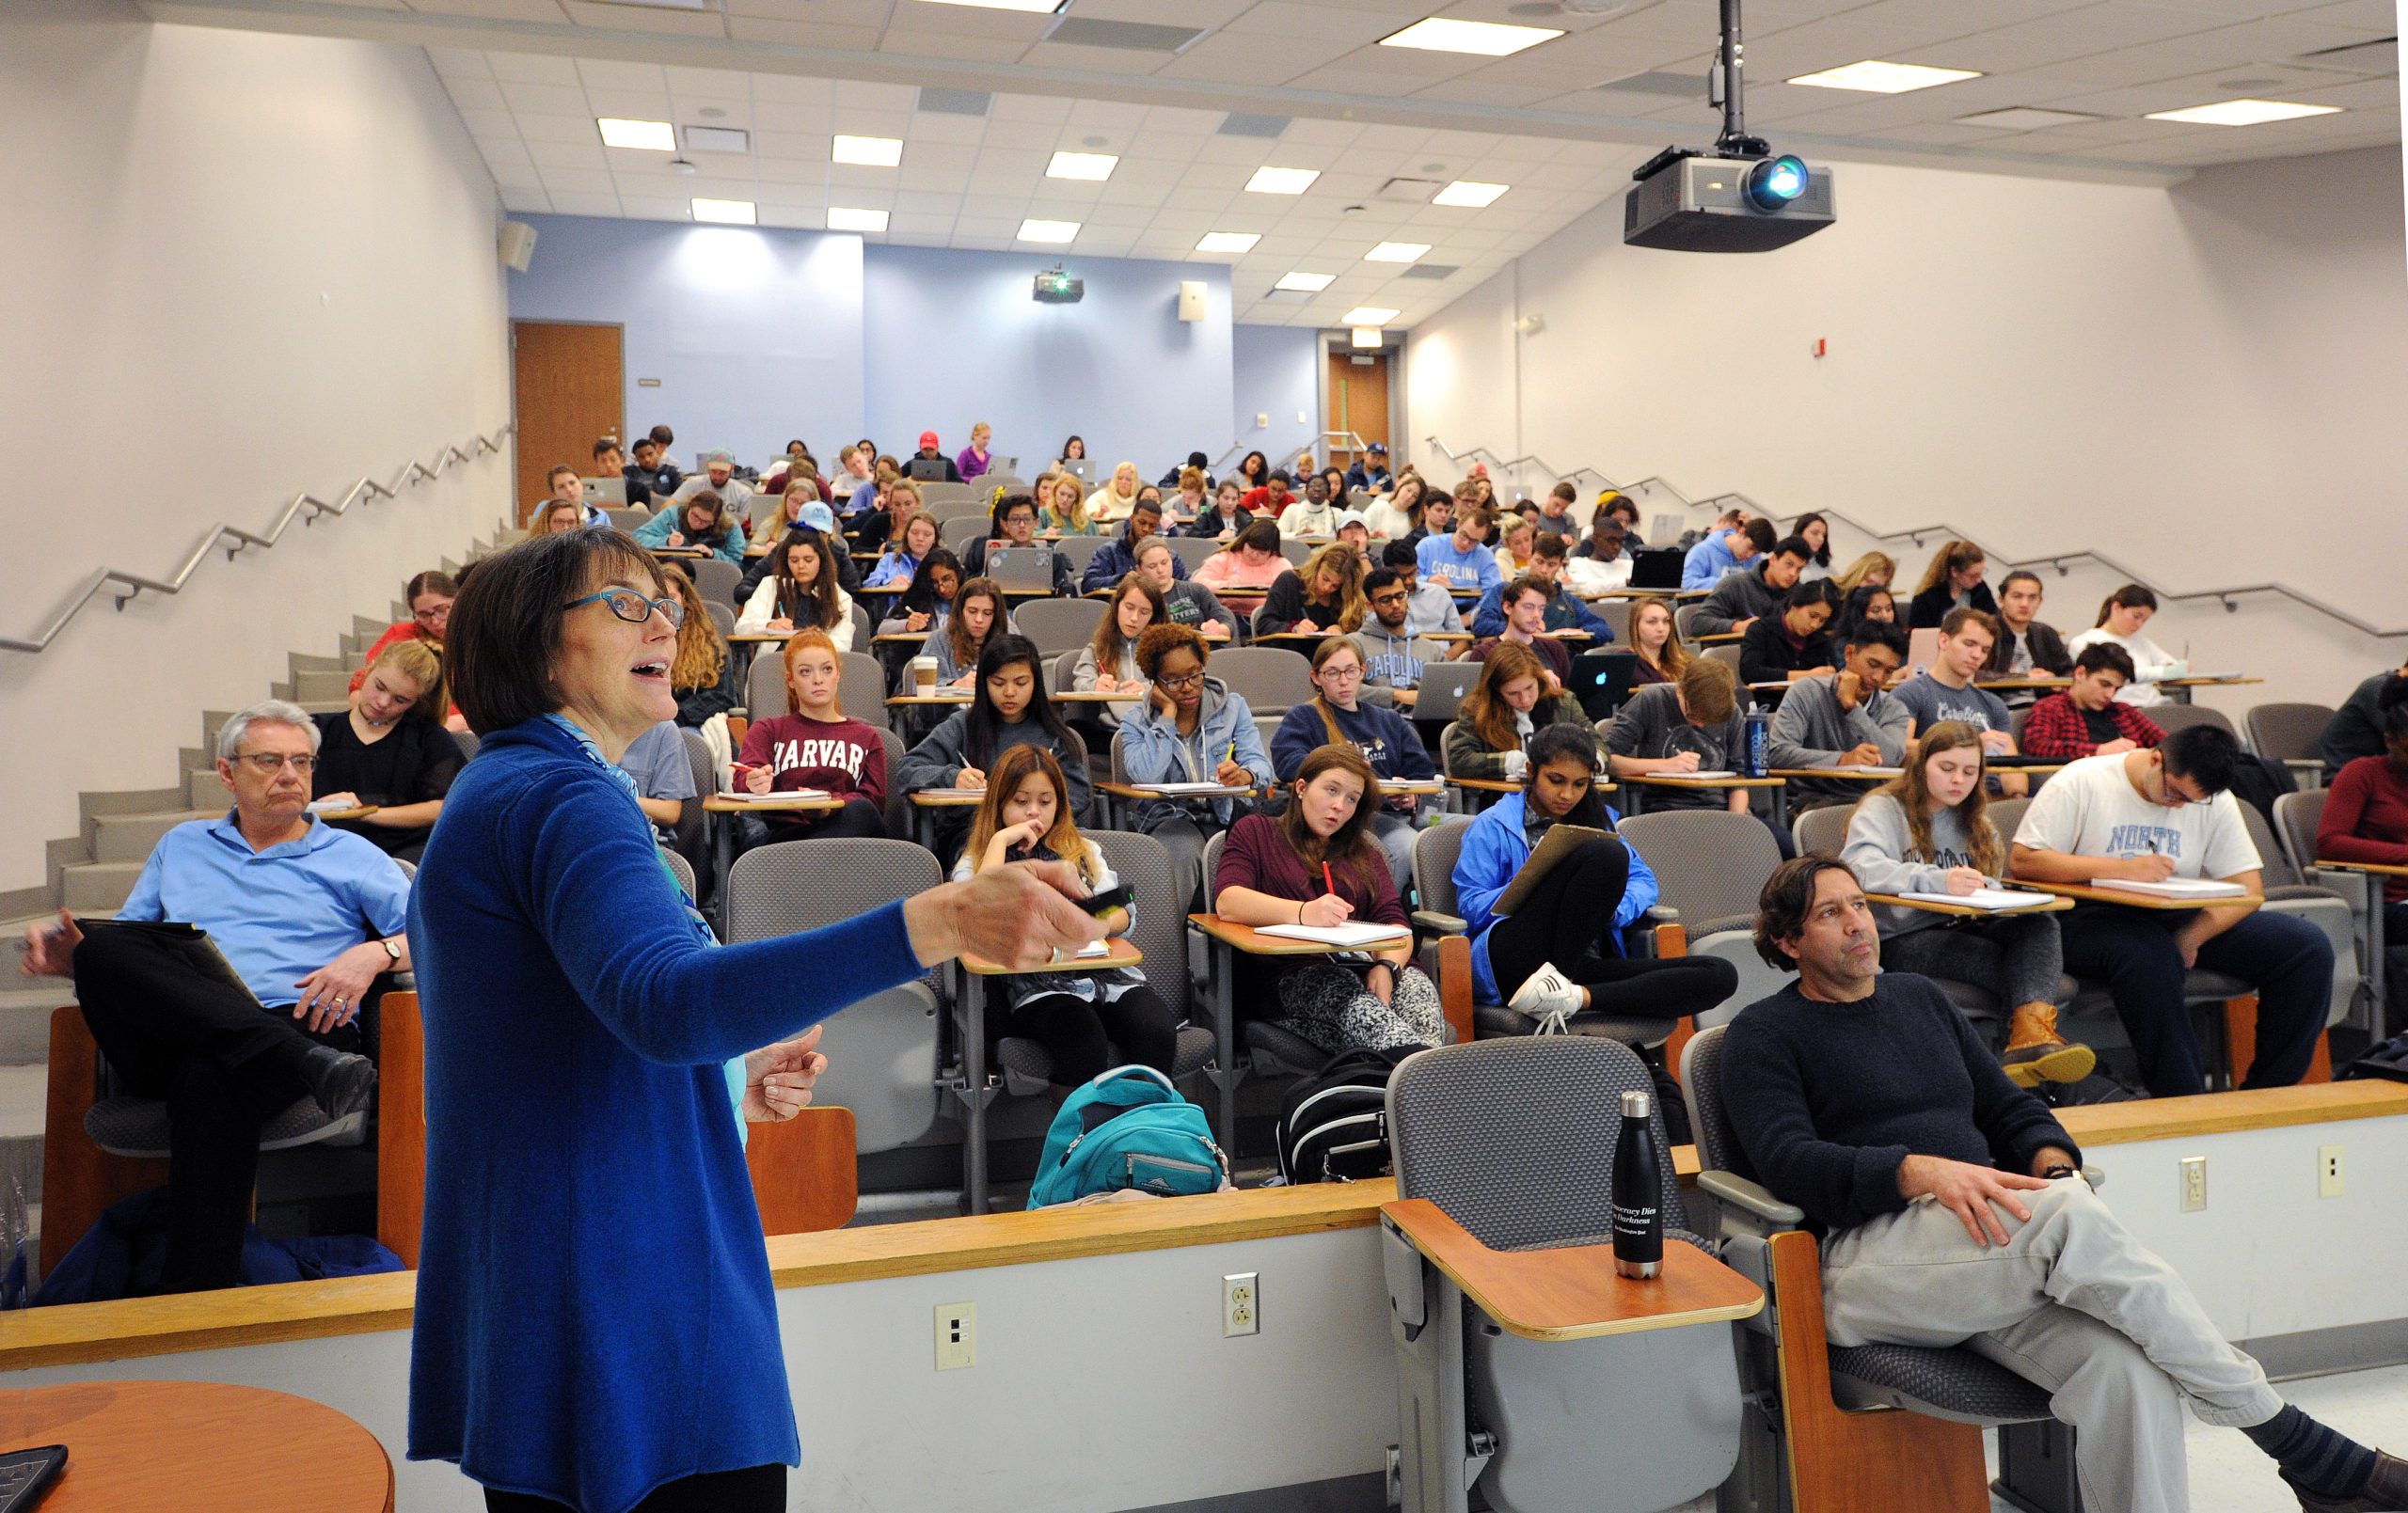 Barbara Fredrickson, Kenan Distinguished Professor of Social Psychology, leads the “Health and Happiness” class in a discussion. (photo by Donn Young)